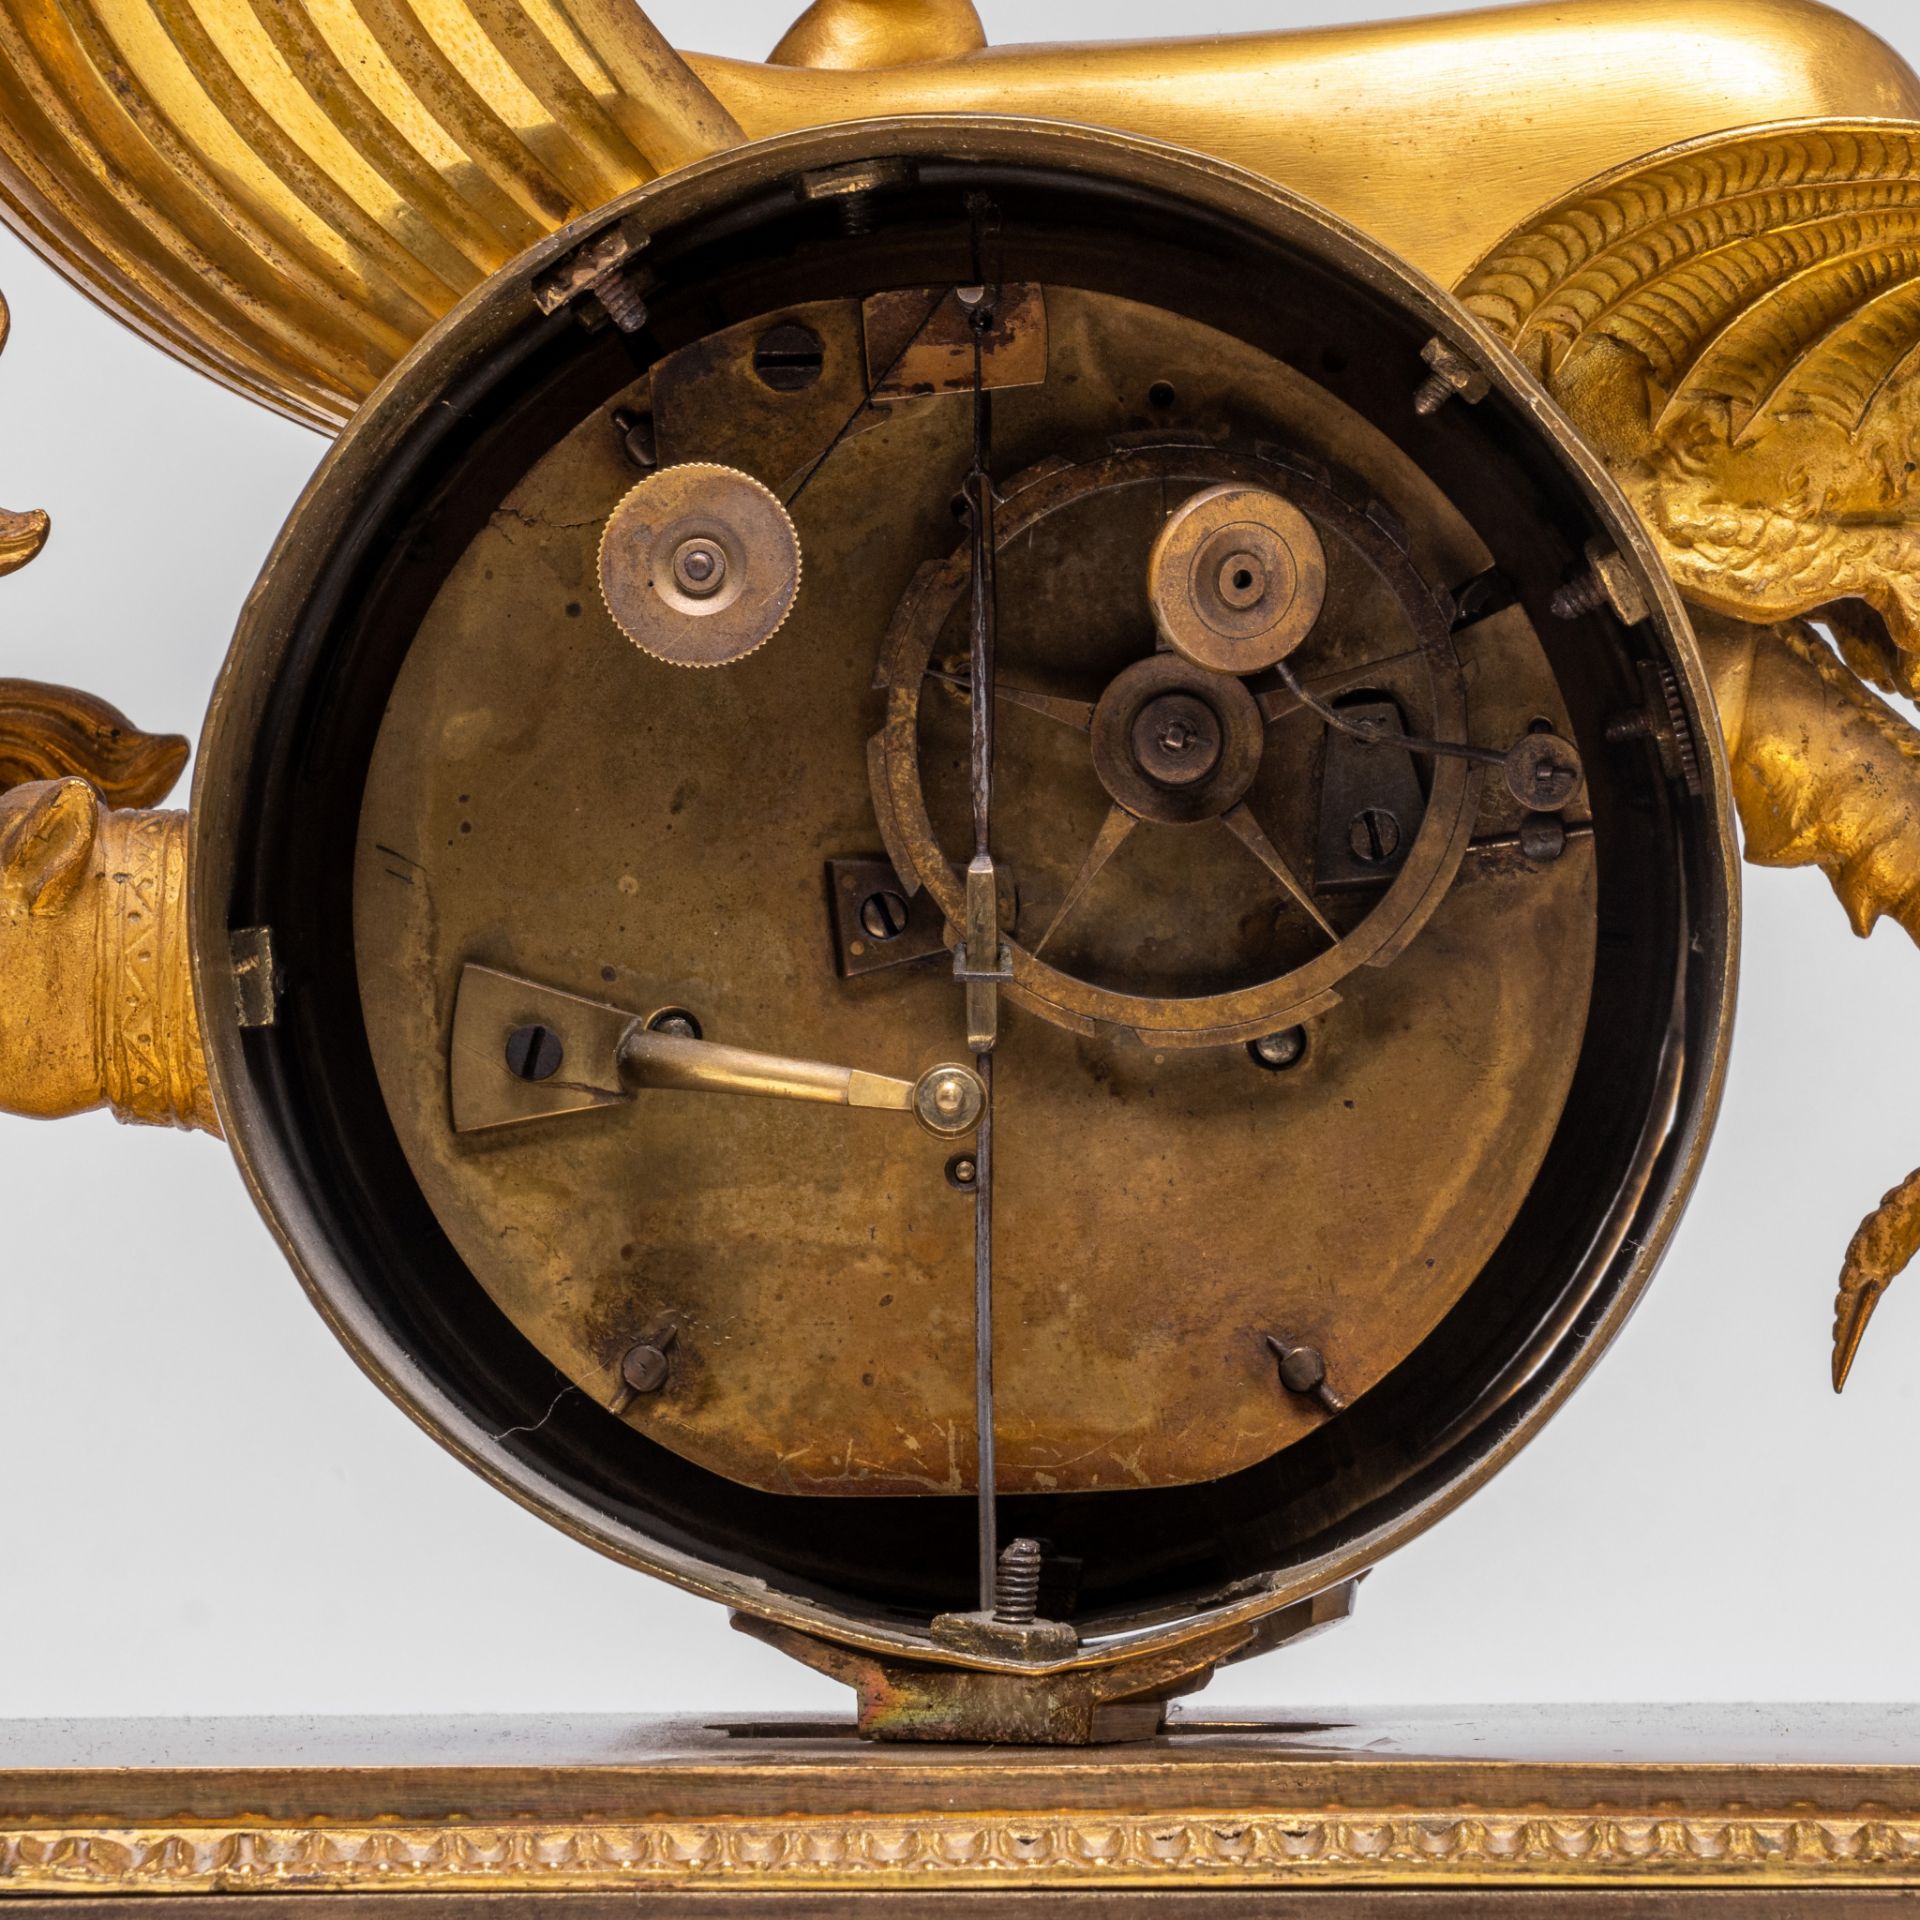 A fine Empire gilt bronze mantle clock of Cupid's chariot, ca. 1810, H 49 - W 46,5 cm - Image 6 of 6